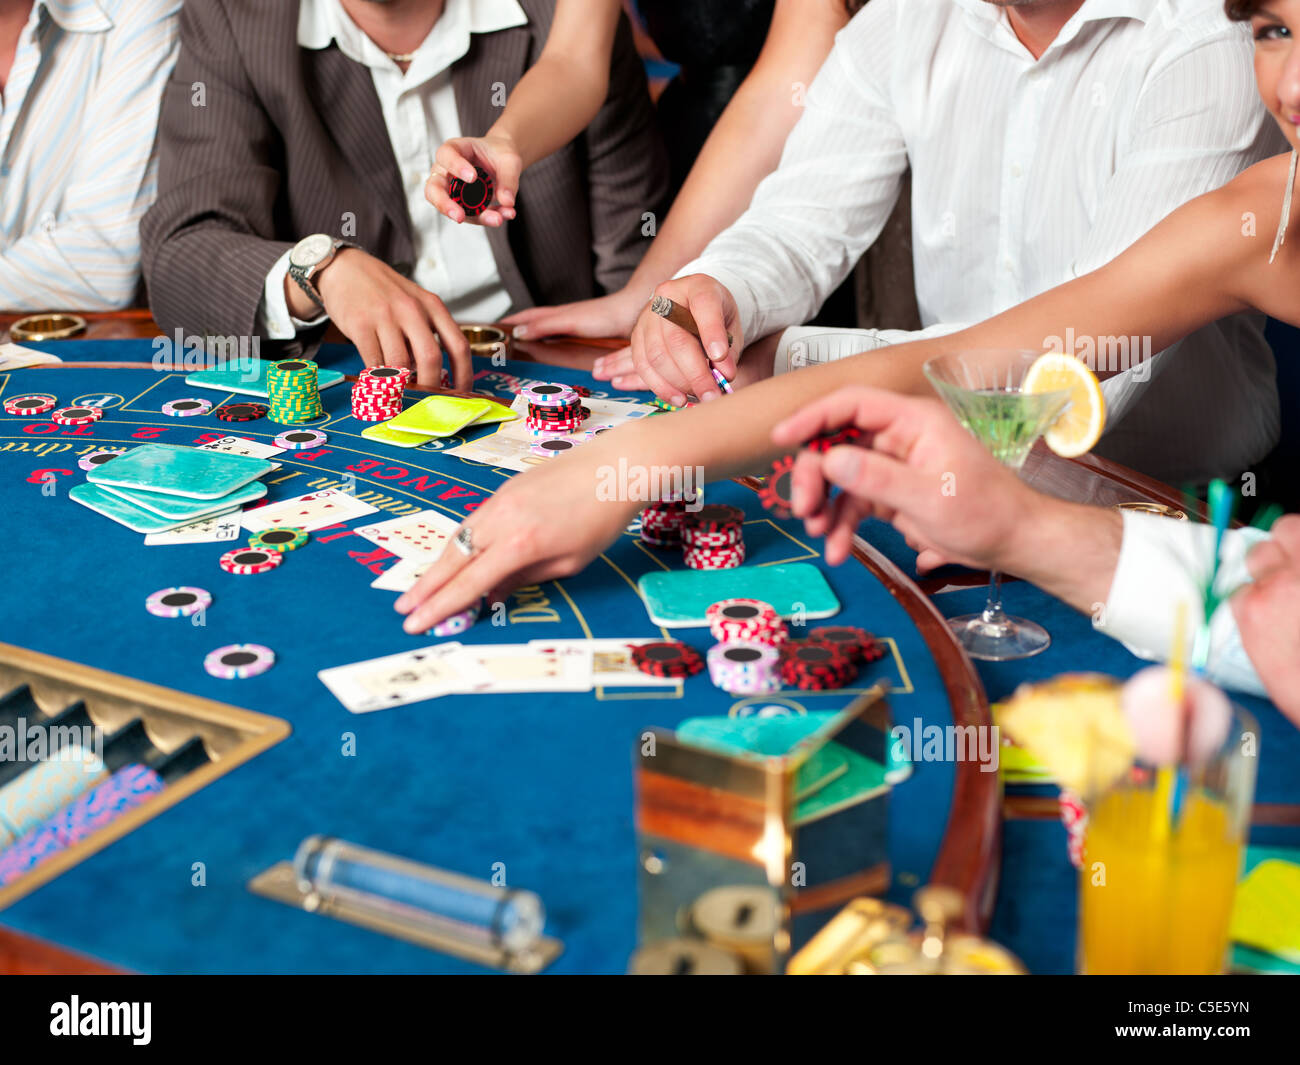 hands on blackjack players with cocktails and casino chips Stock Photo